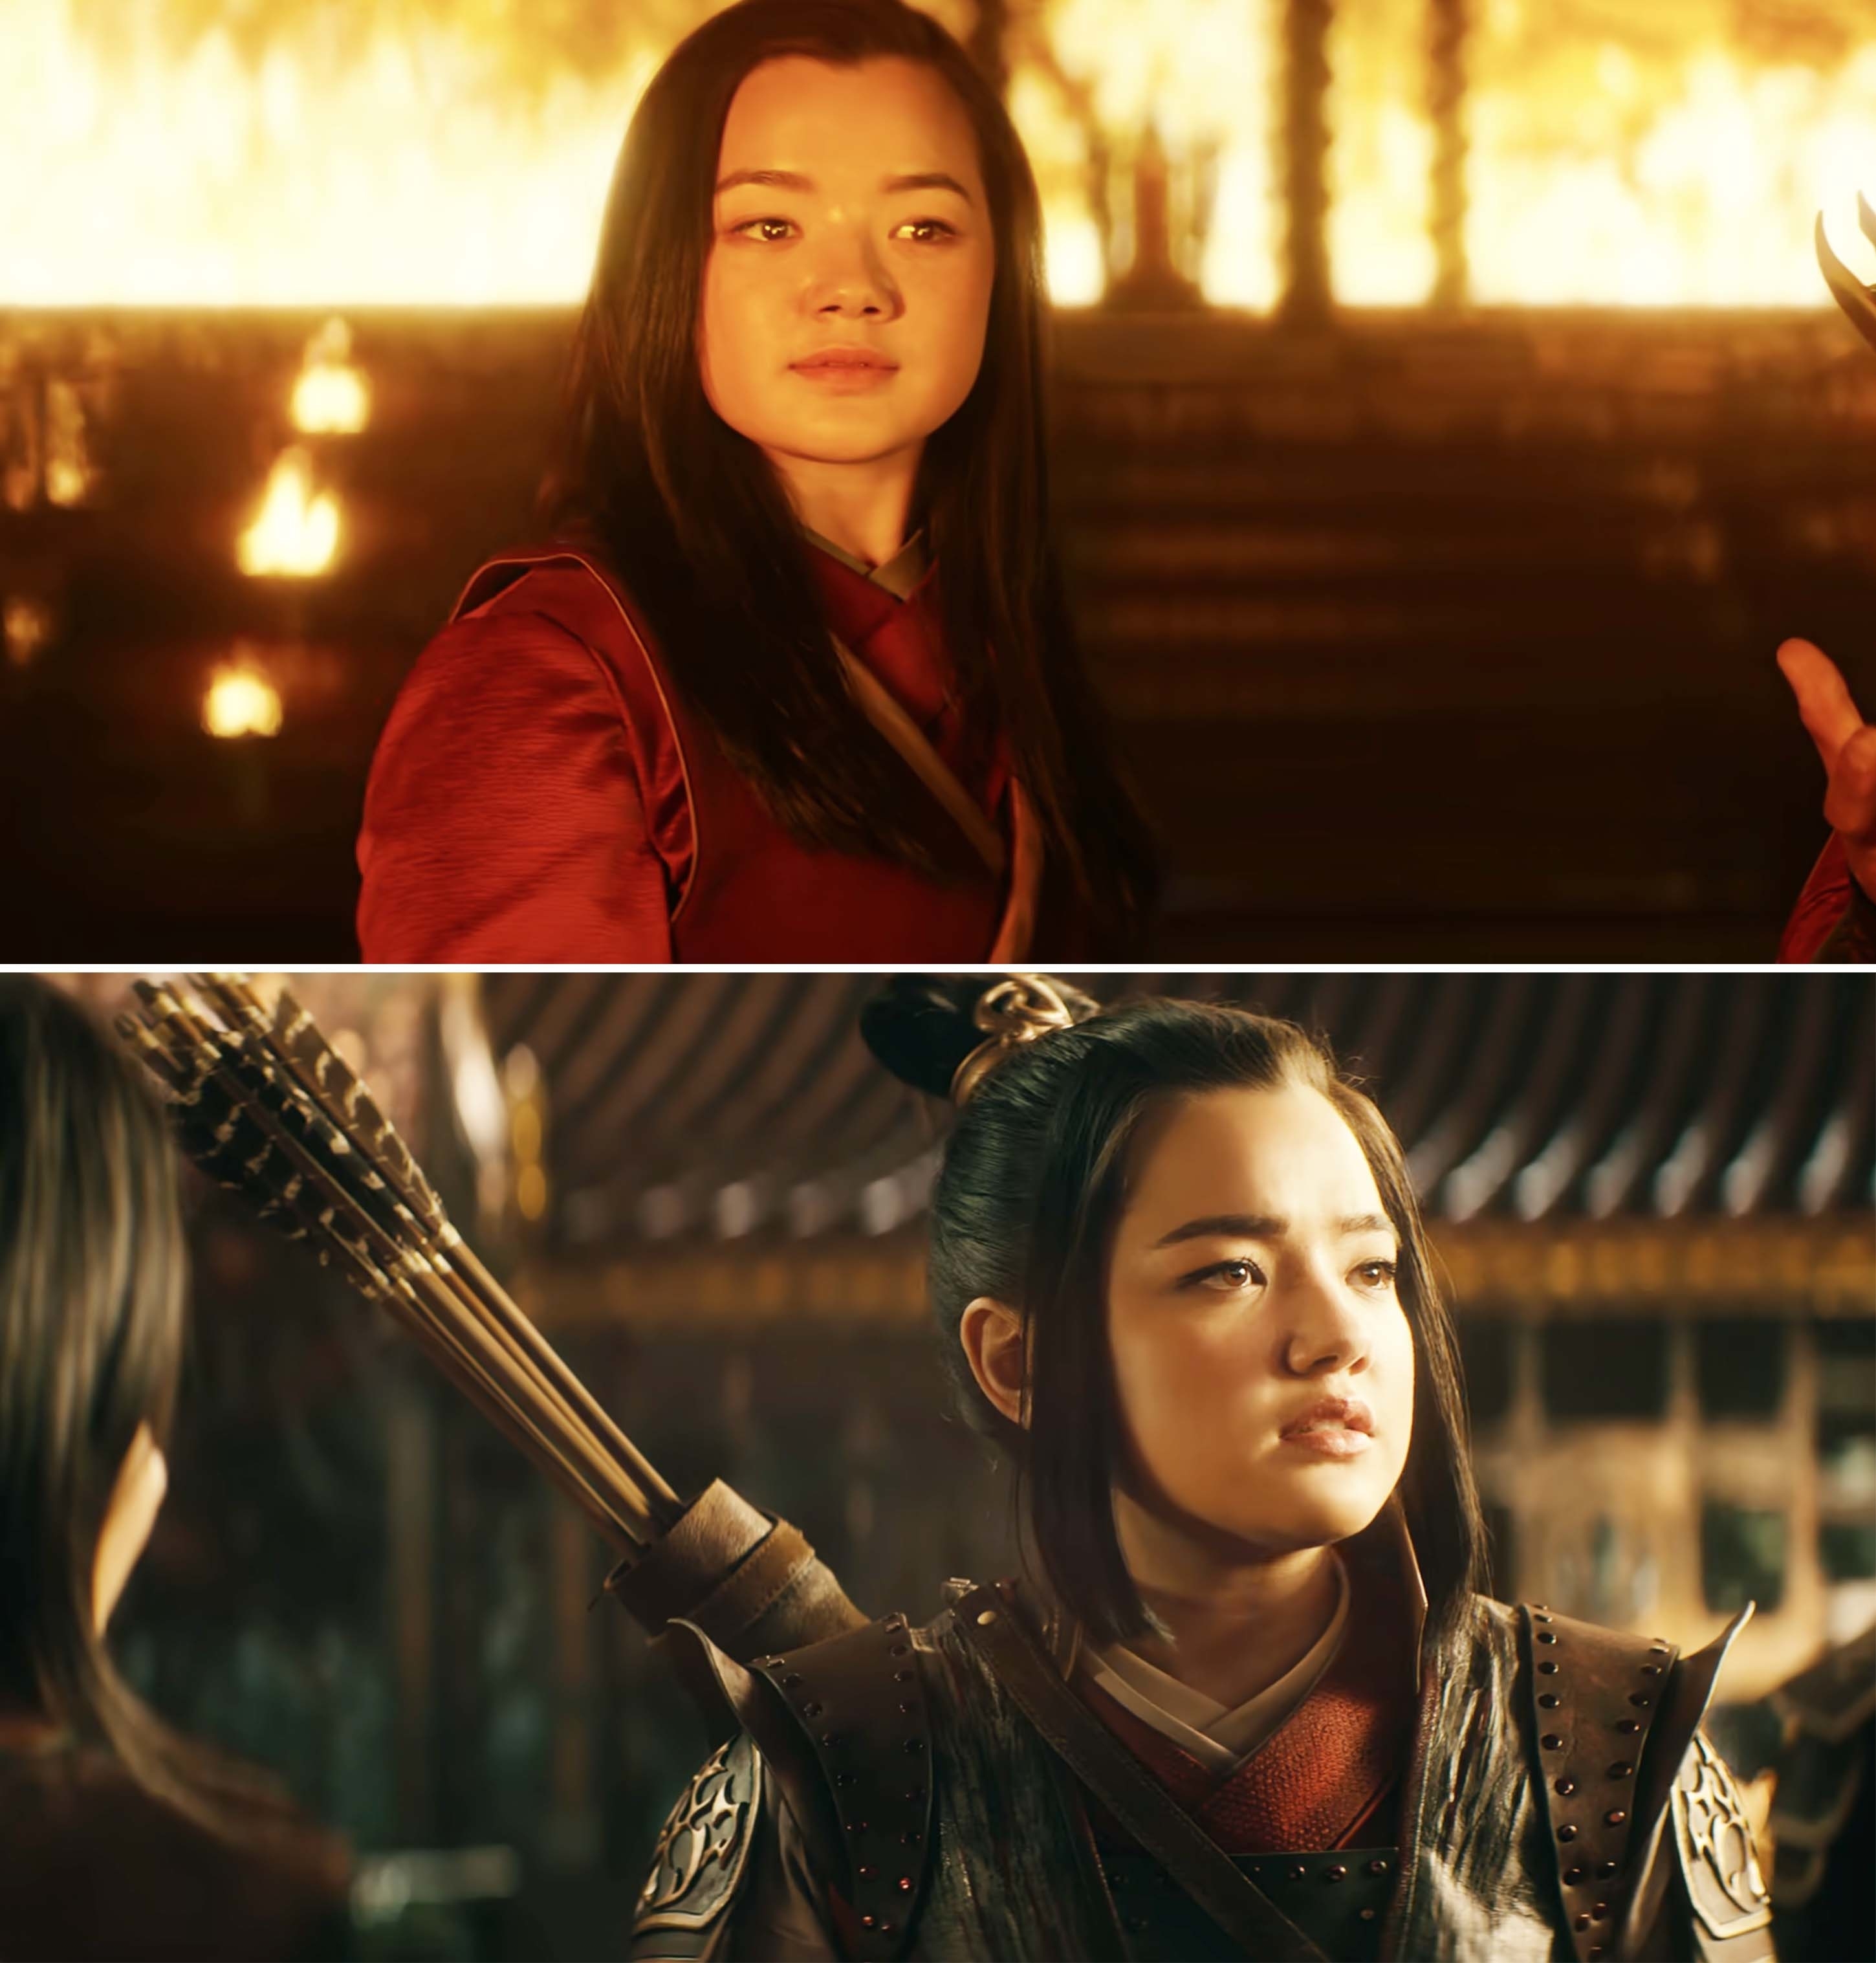 closeup of her character in normal dress and then in warrior attire